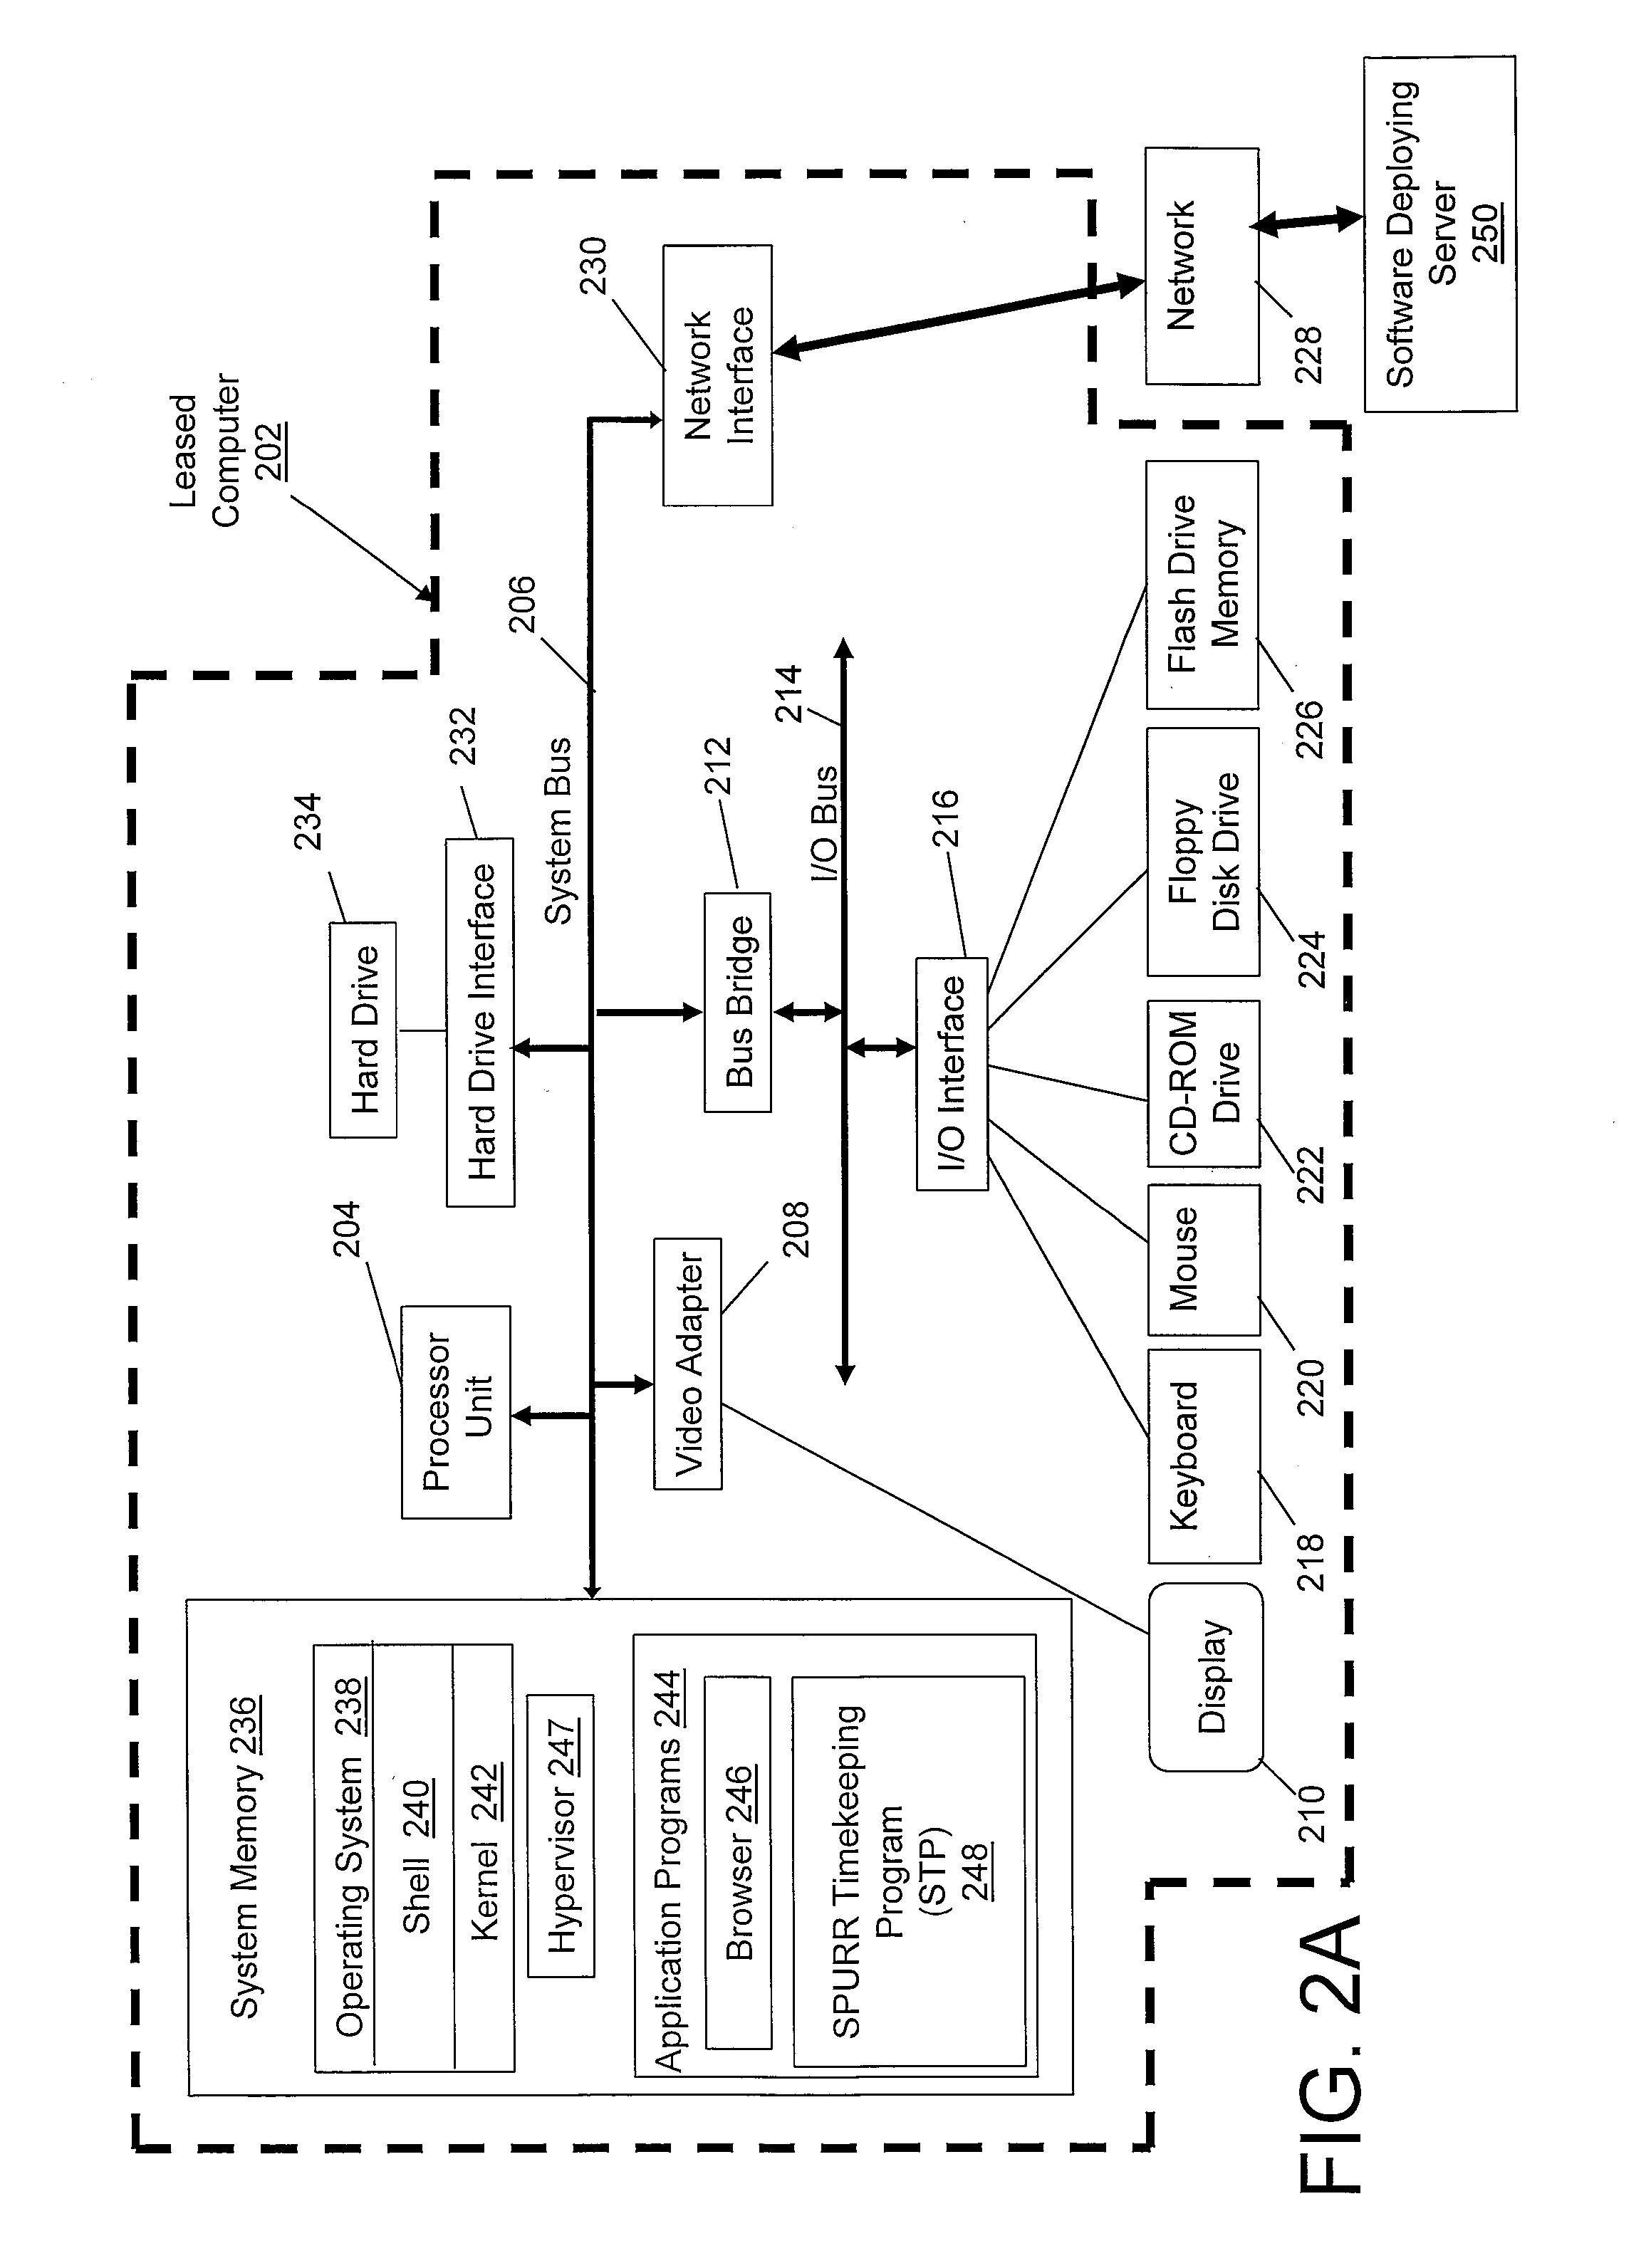 Method and apparatus for frequency independent processor utilization recording register in a simultaneously multi-threaded processor